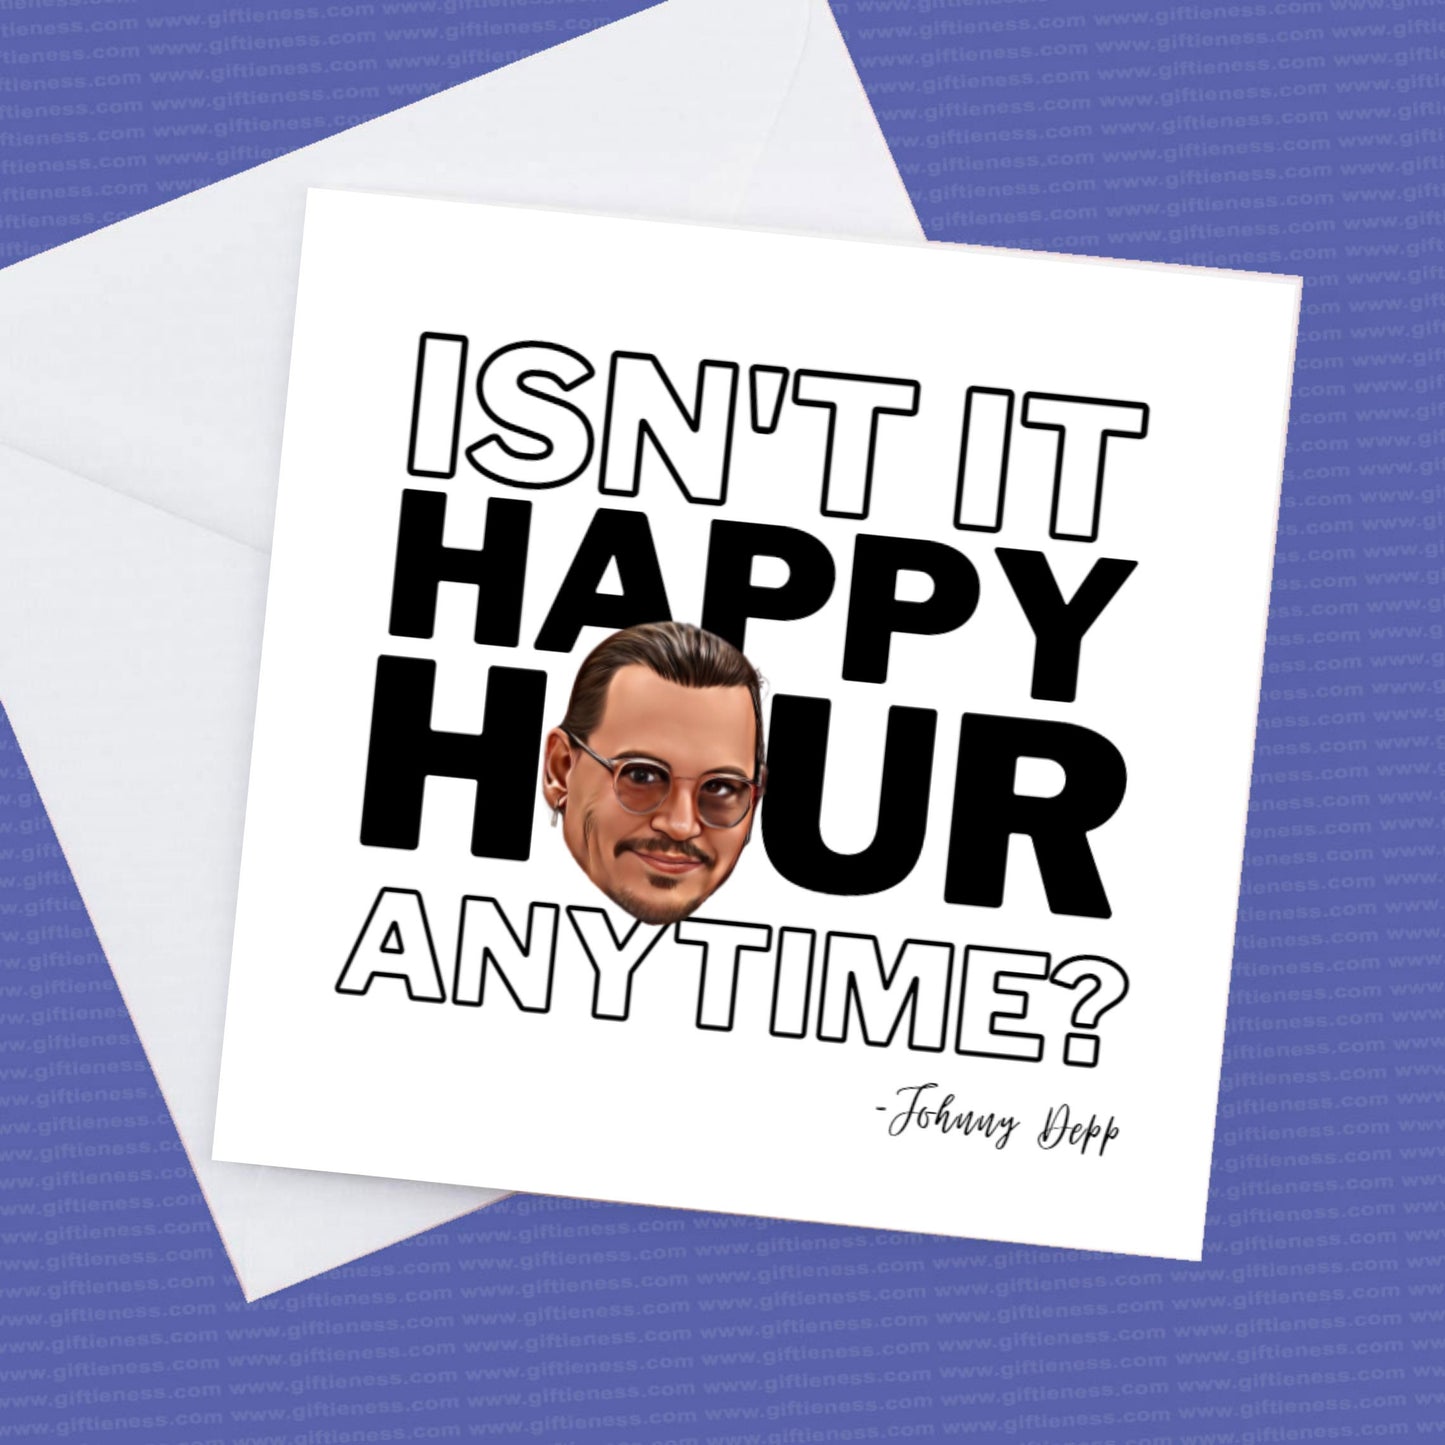 Isn't It Happy Hour Any Time Johnny Depp Card, Johnny Depp Birthday Card, Johnny Depp Fun Card